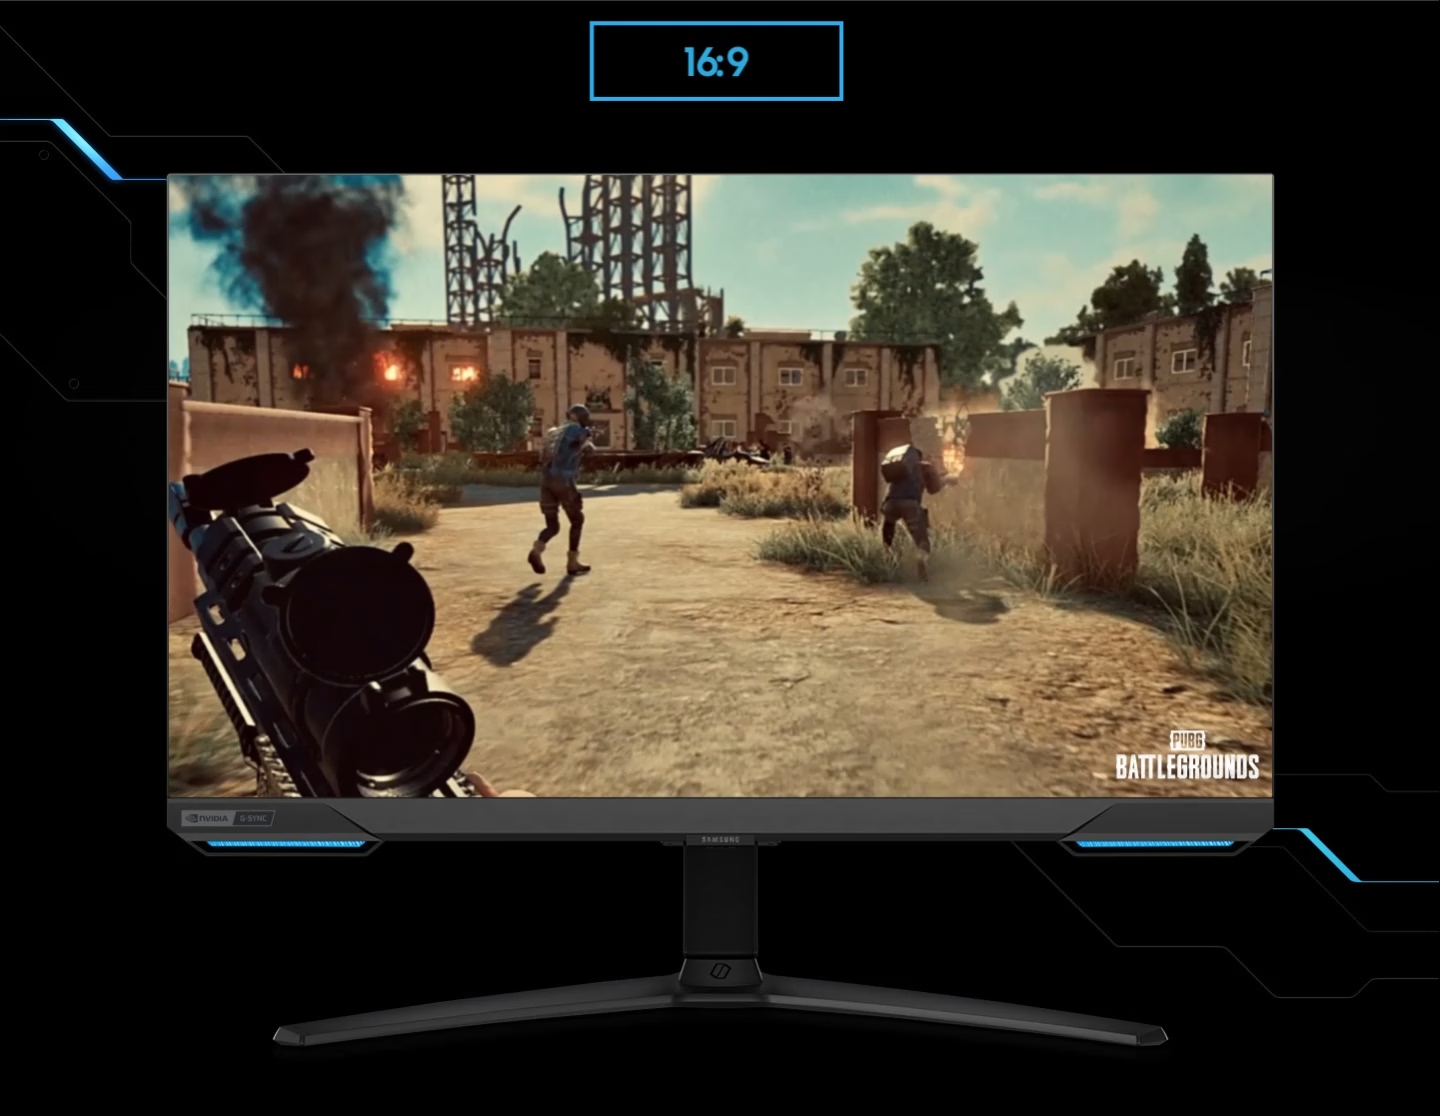 A monitor shows the perspective of a player within a first-person action game. As the screen is extended from 16:9 to 21:9 proportion, an enemy appears in the far left corner, revealed thanks to the monitor's wider perspective. The game title ""PUBG BATTLEGROUND"" is located in the lower right corner.